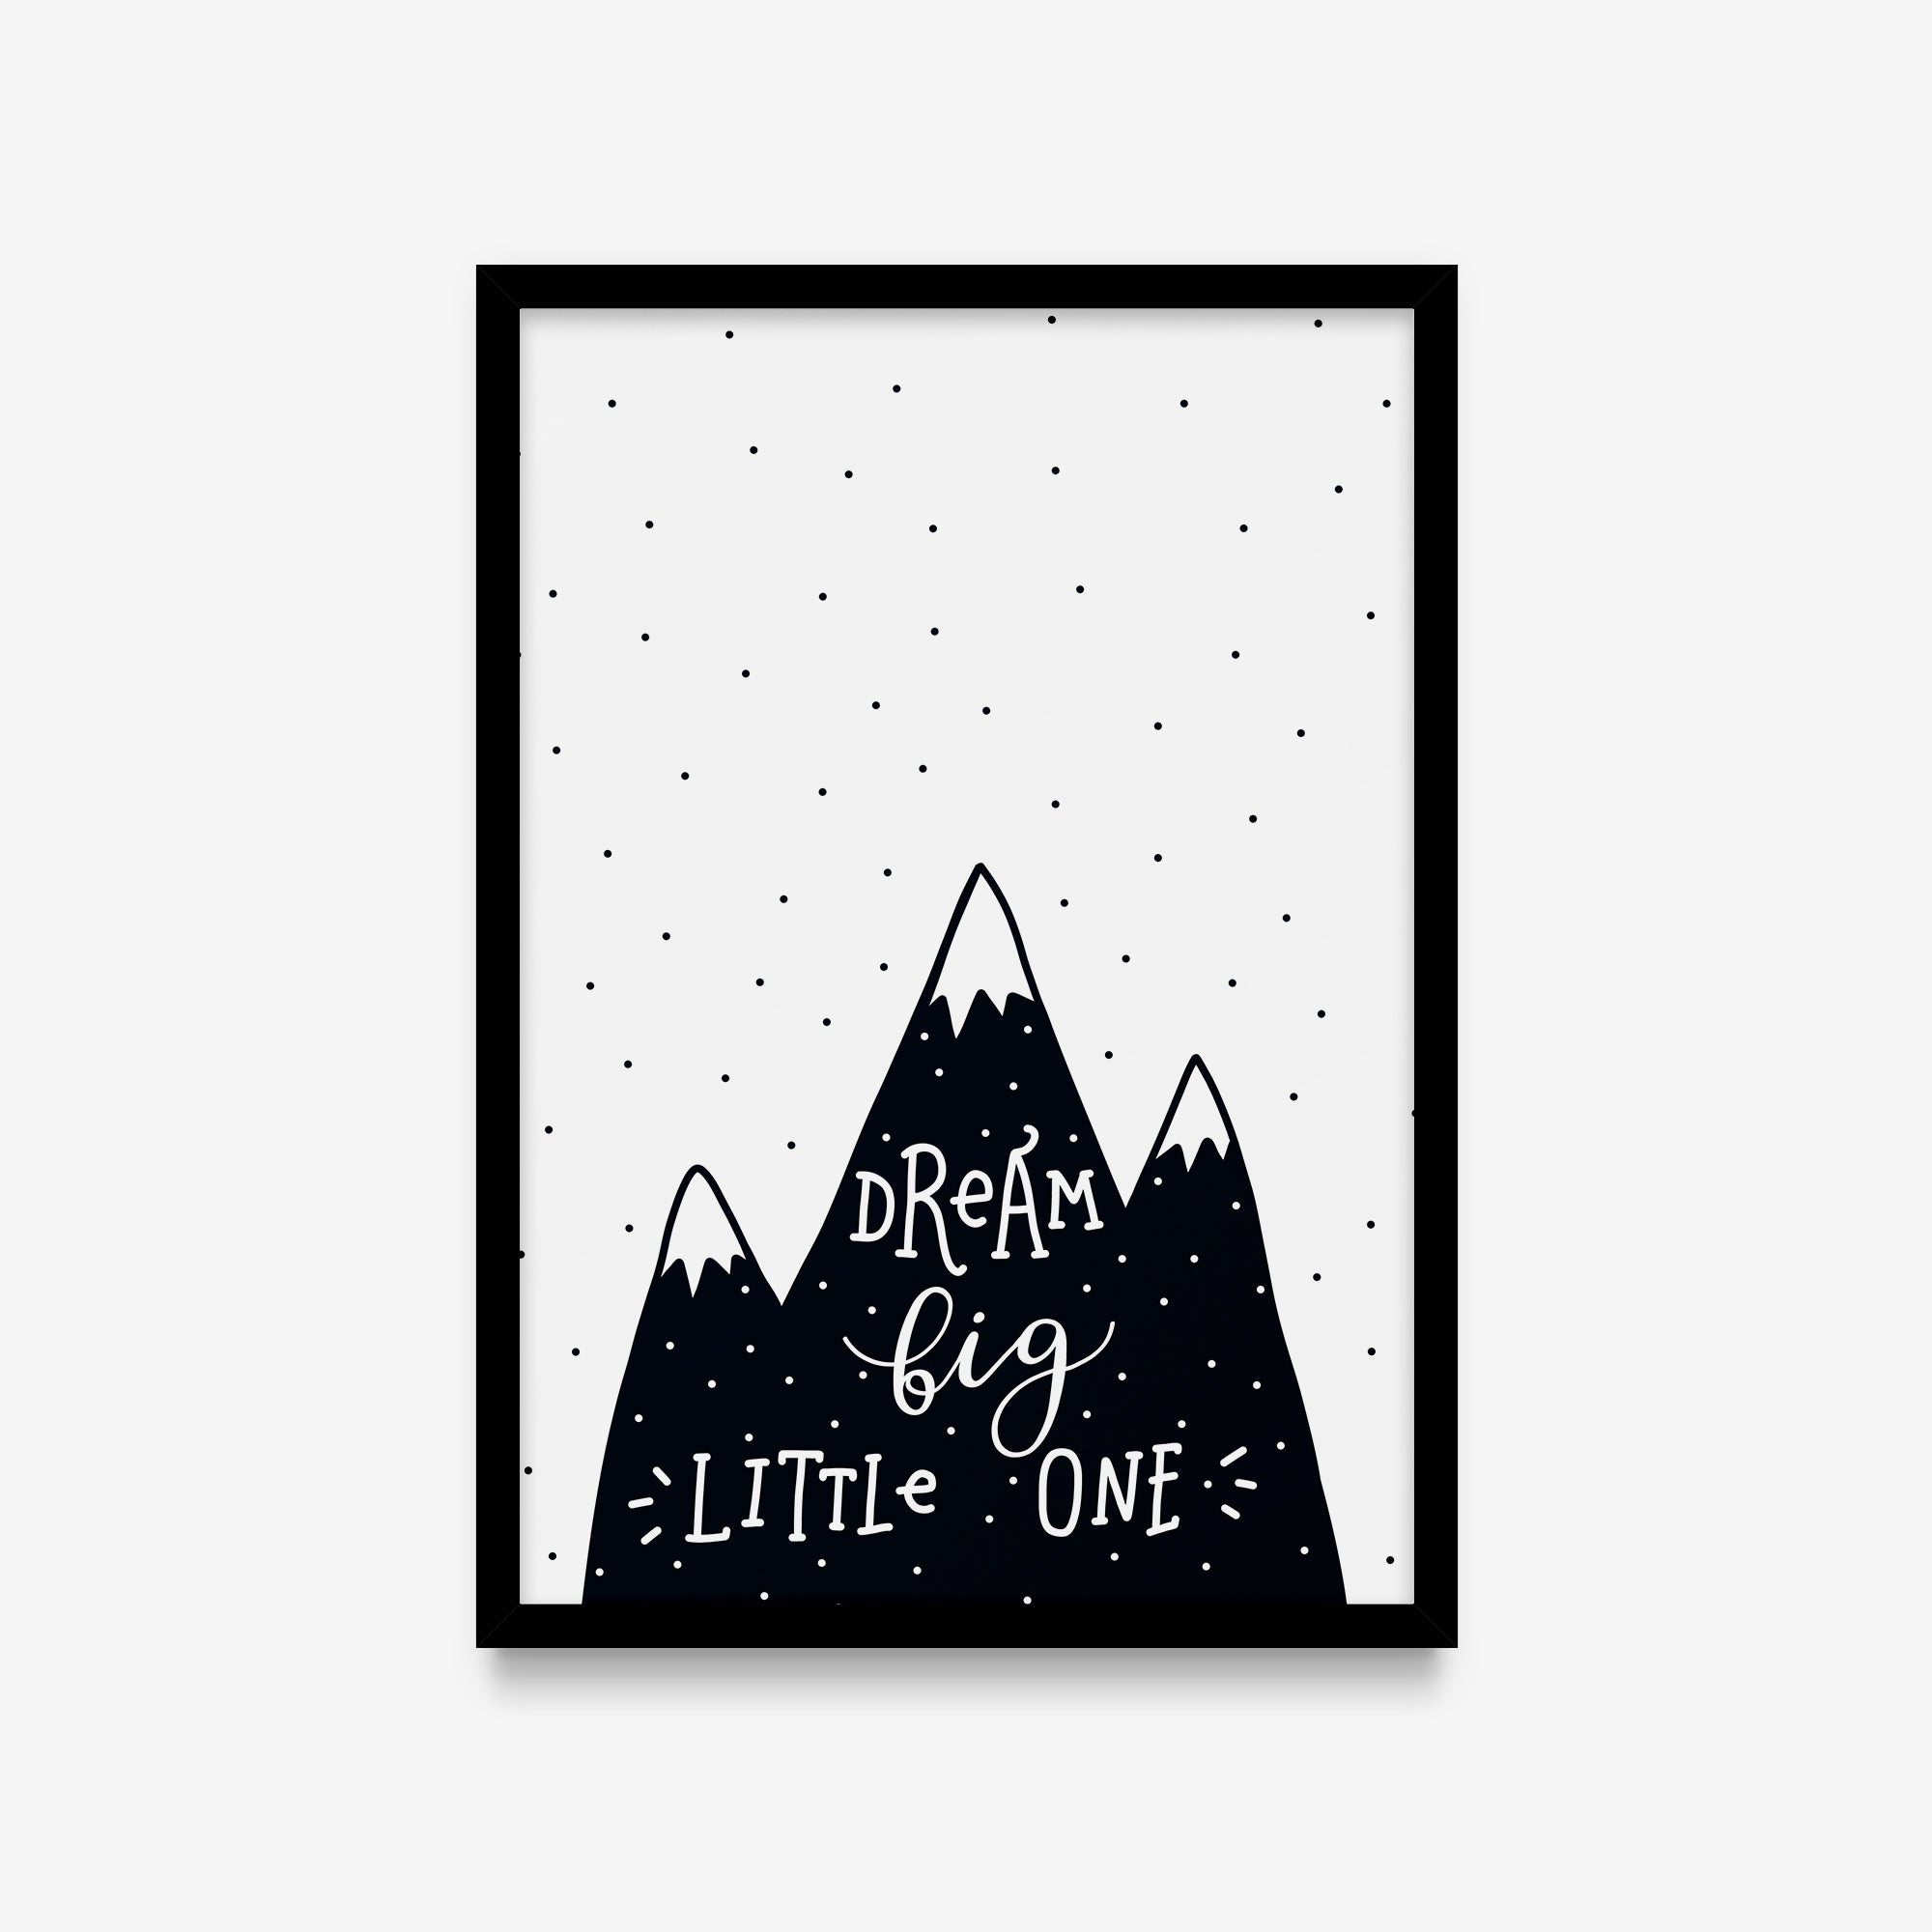 Frases - Dream big little one